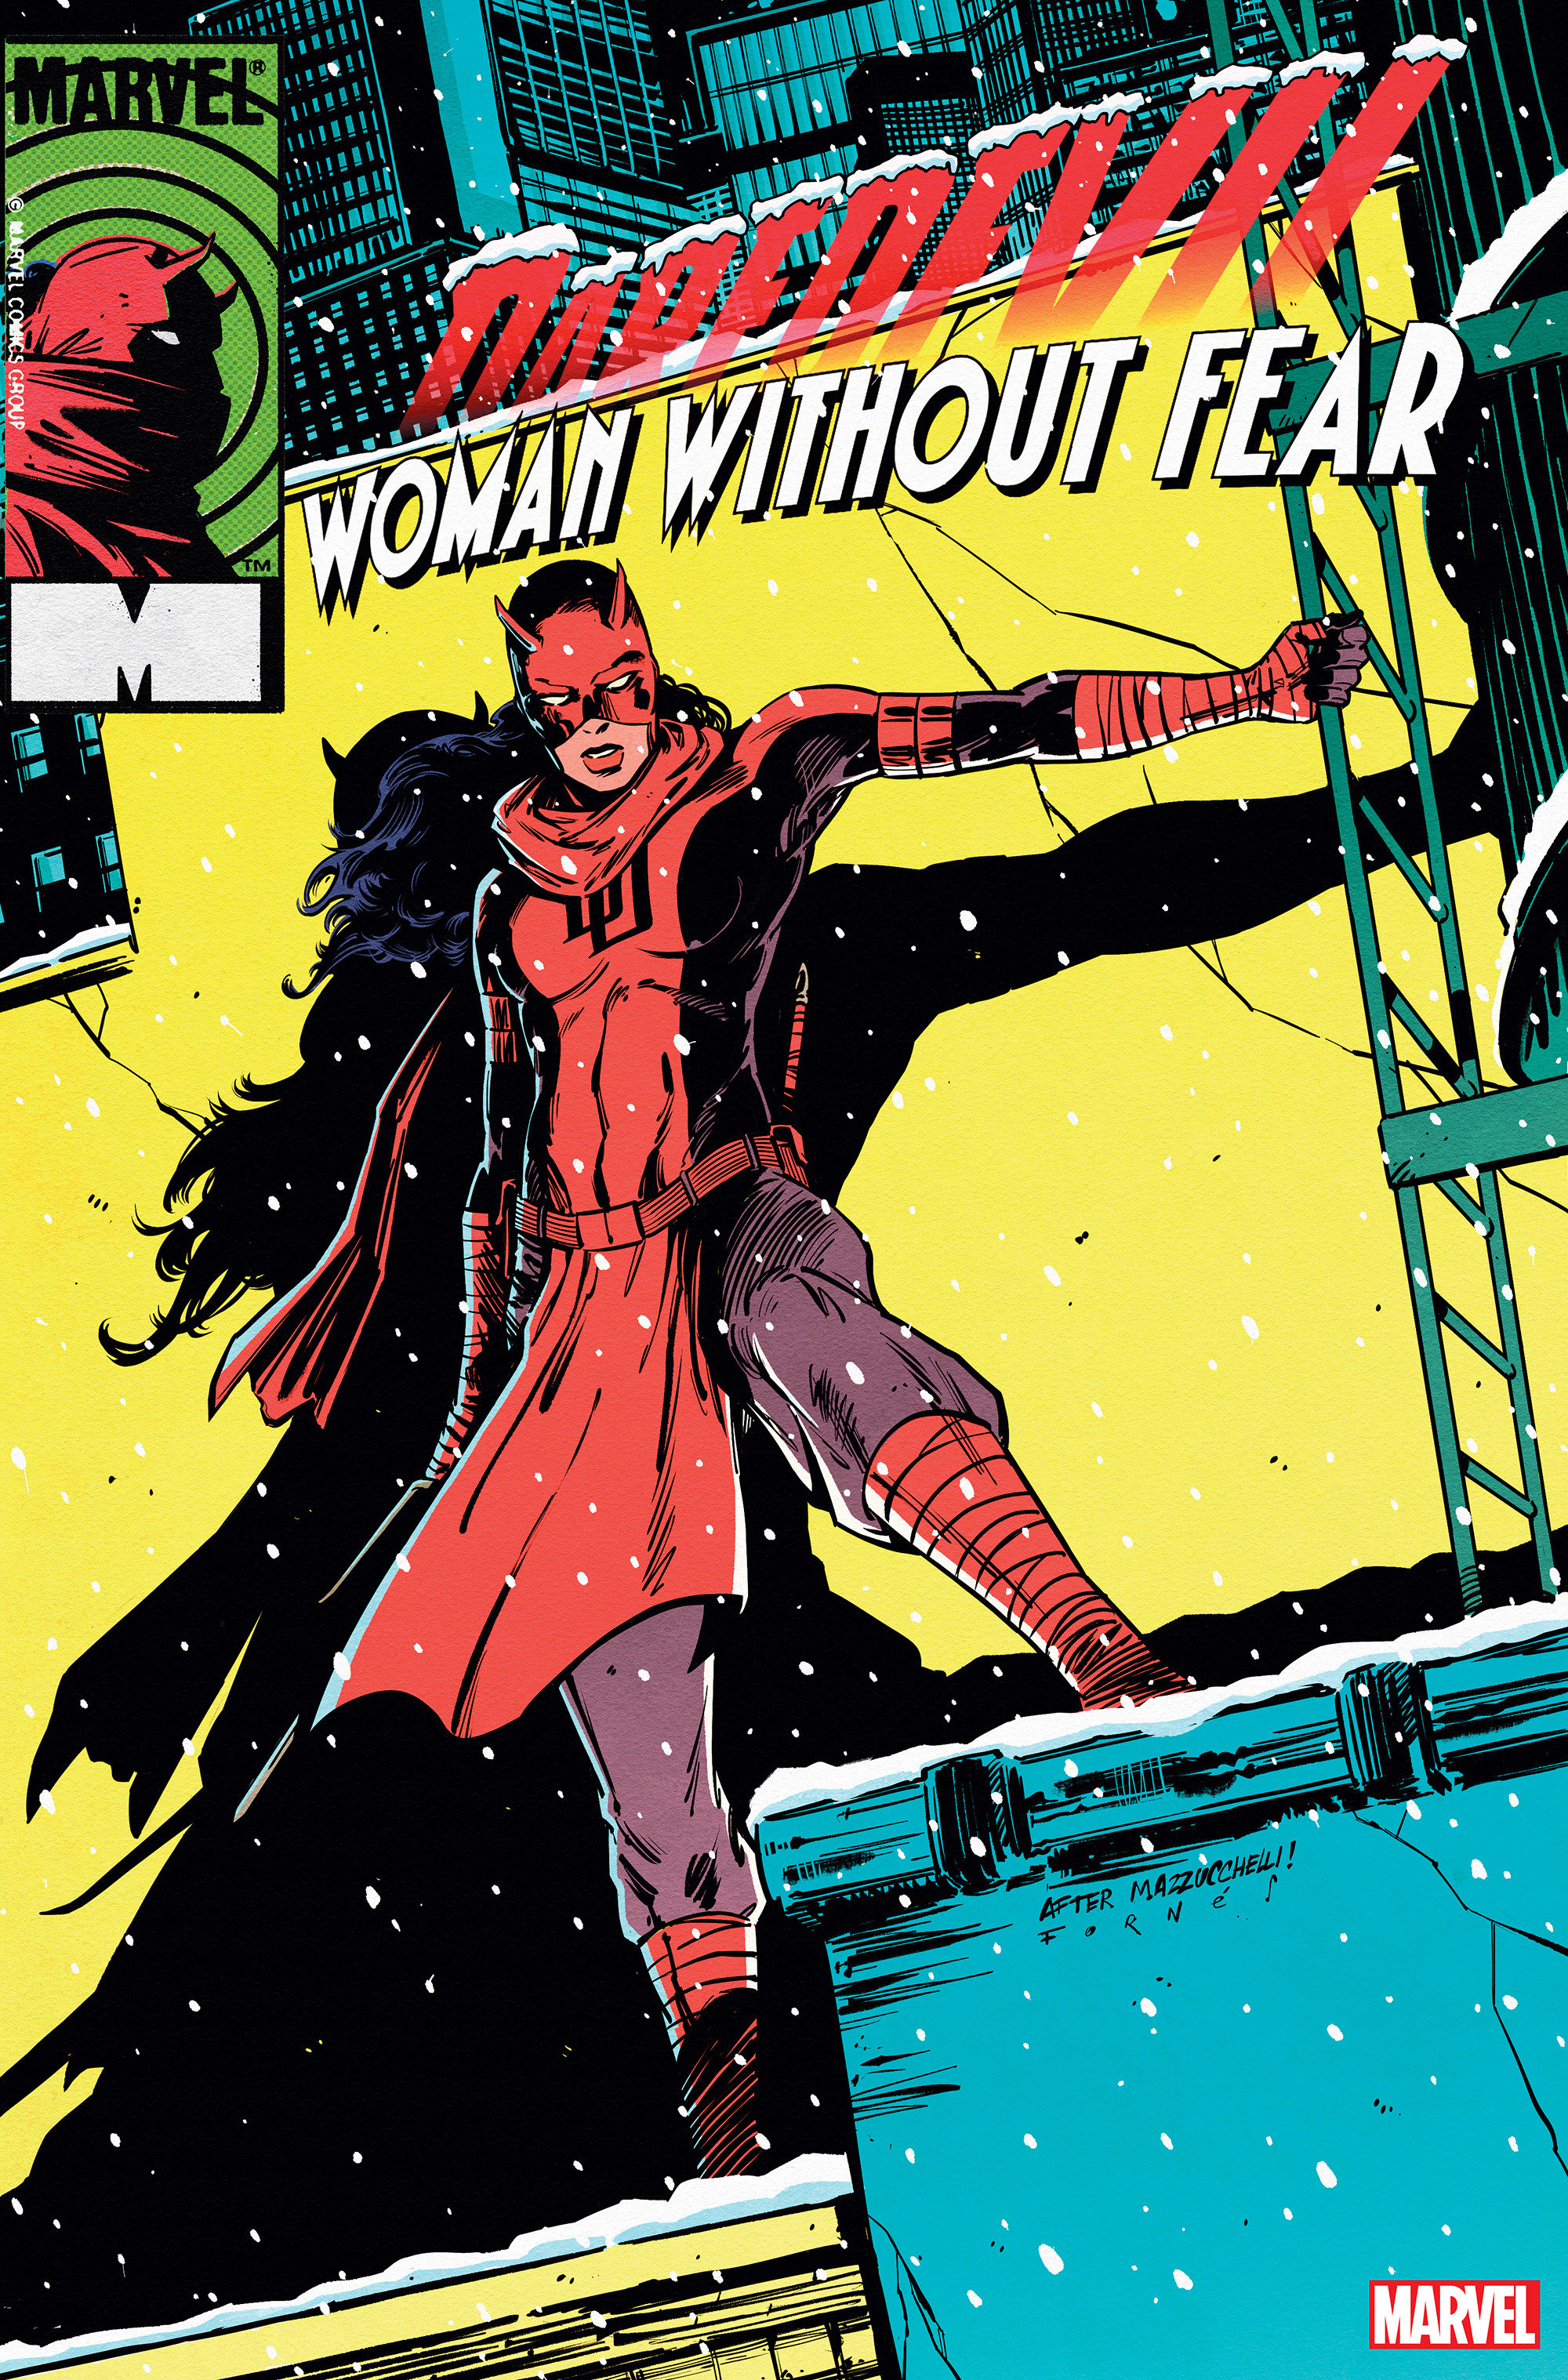 Daredevil Woman Without Fear #2 Fornes Variant (Of 3)